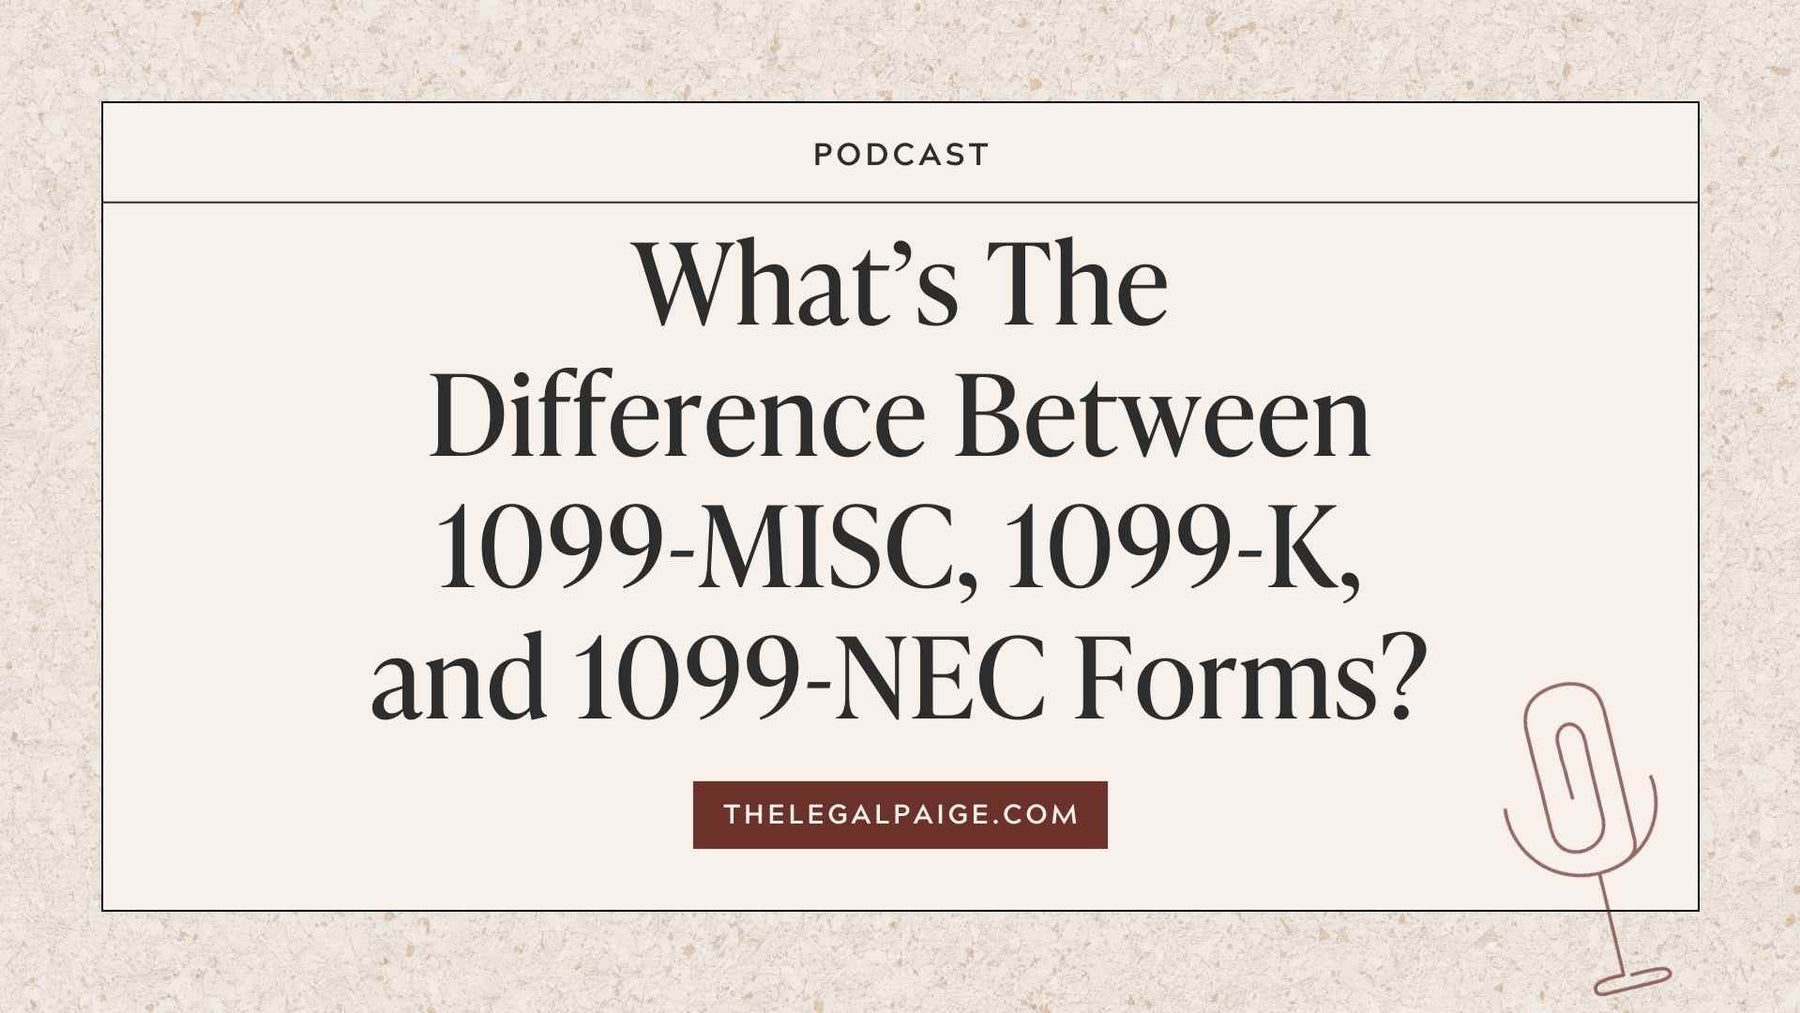 Episode 118: What’s The Difference Between 1099-MISC, 1099-K, and 1099-NEC Forms?